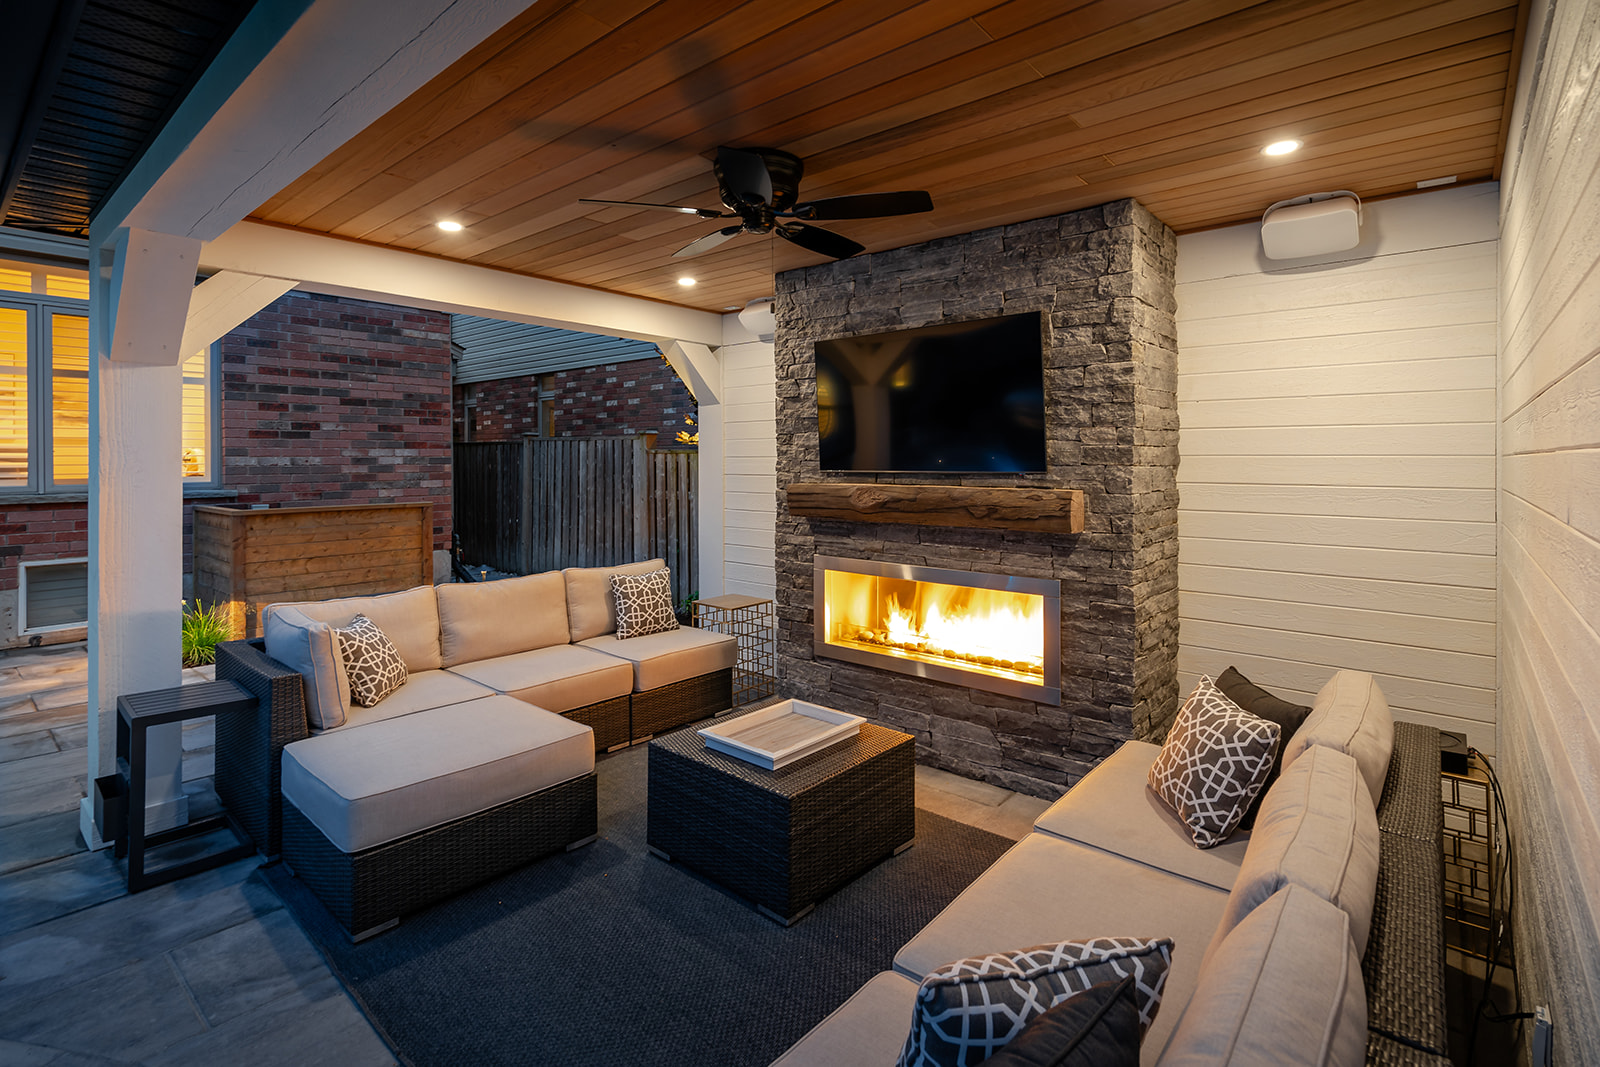 Two outdoor couches underneath a gazebo with a TV and fireplace on the wall.